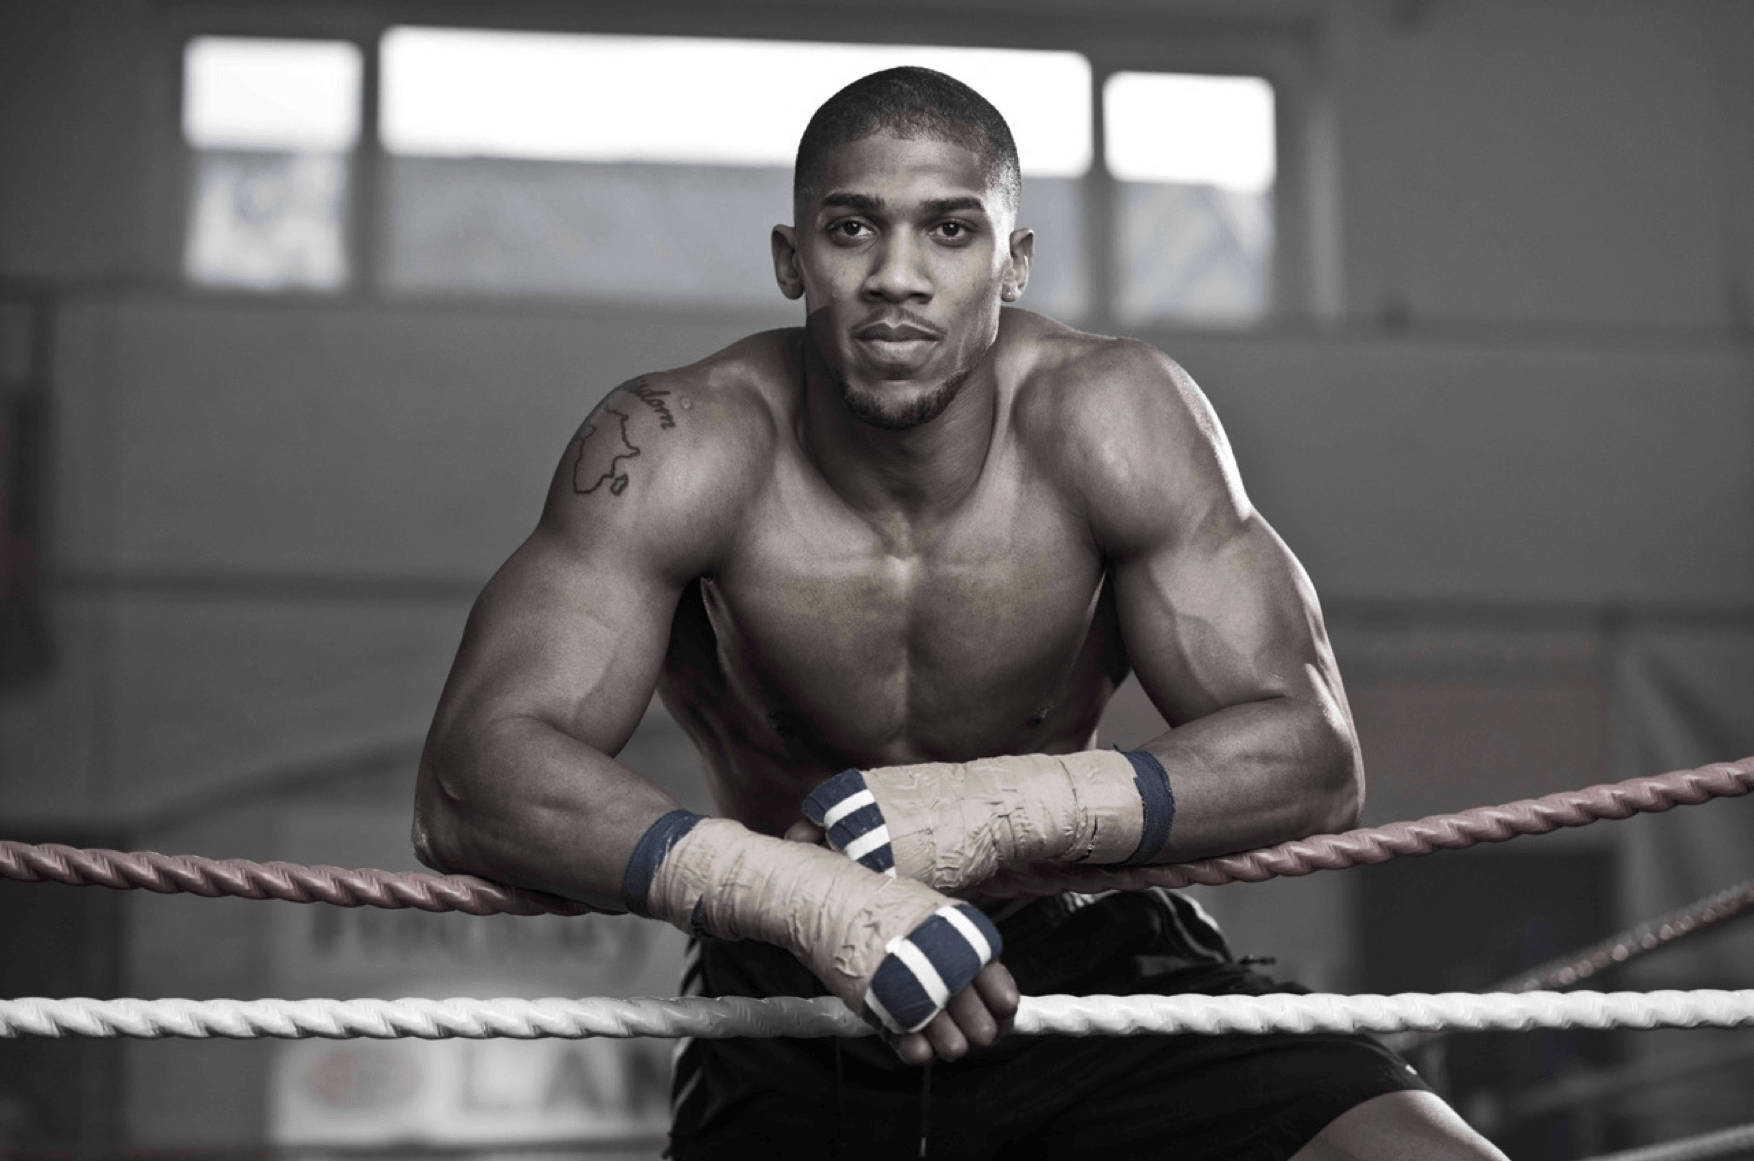 Anthony Joshua Leaning On Ropes Wallpaper